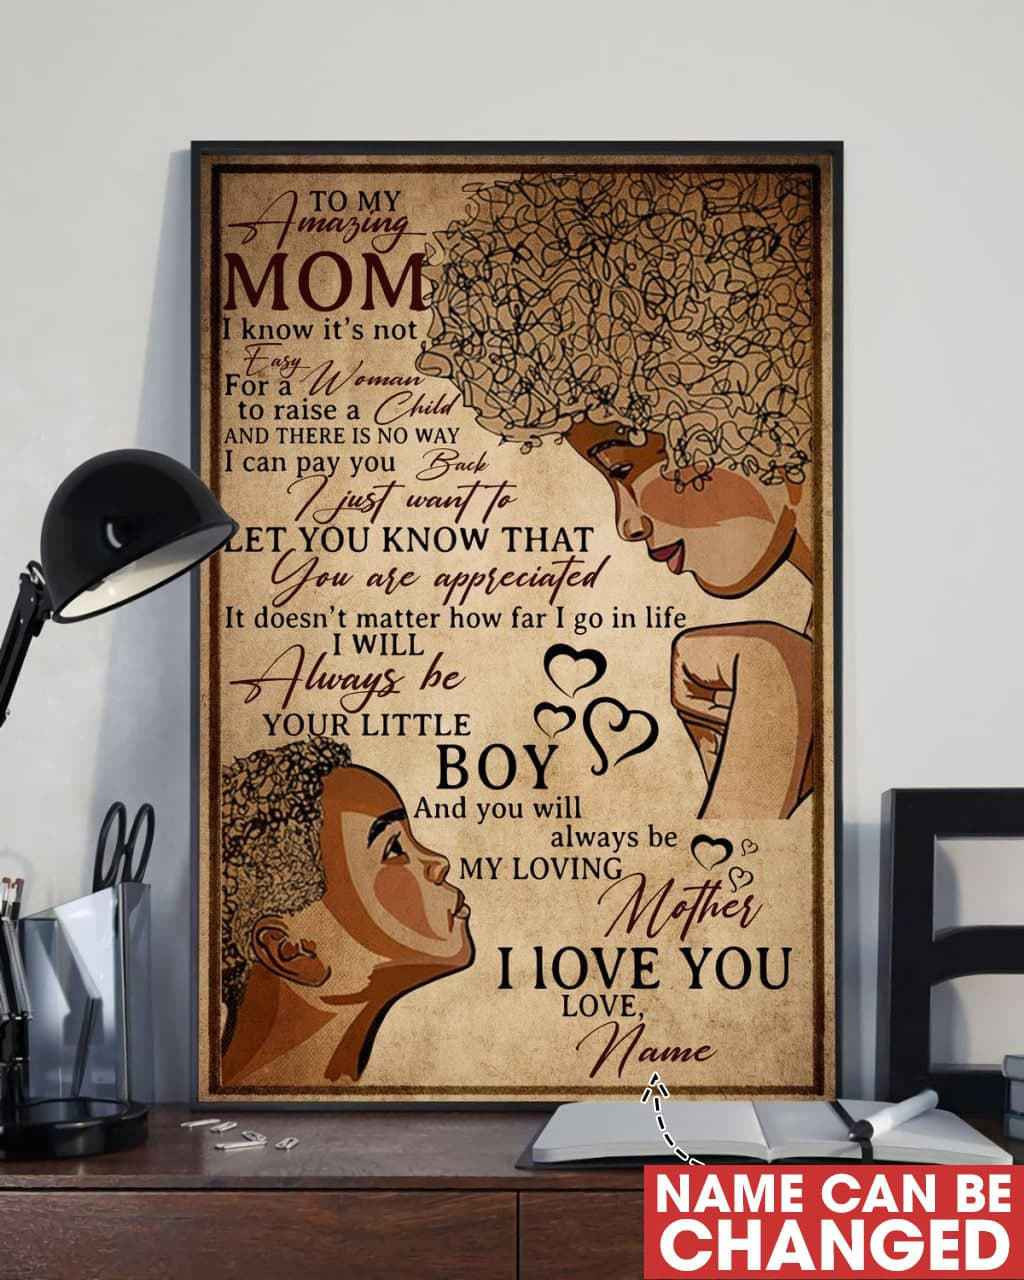 To My Amazing Black Mom Decor Personalized Painting Prints Gift Idea Mothers Day Framed Prints, Canvas Paintings Wrapped Canvas 8x10